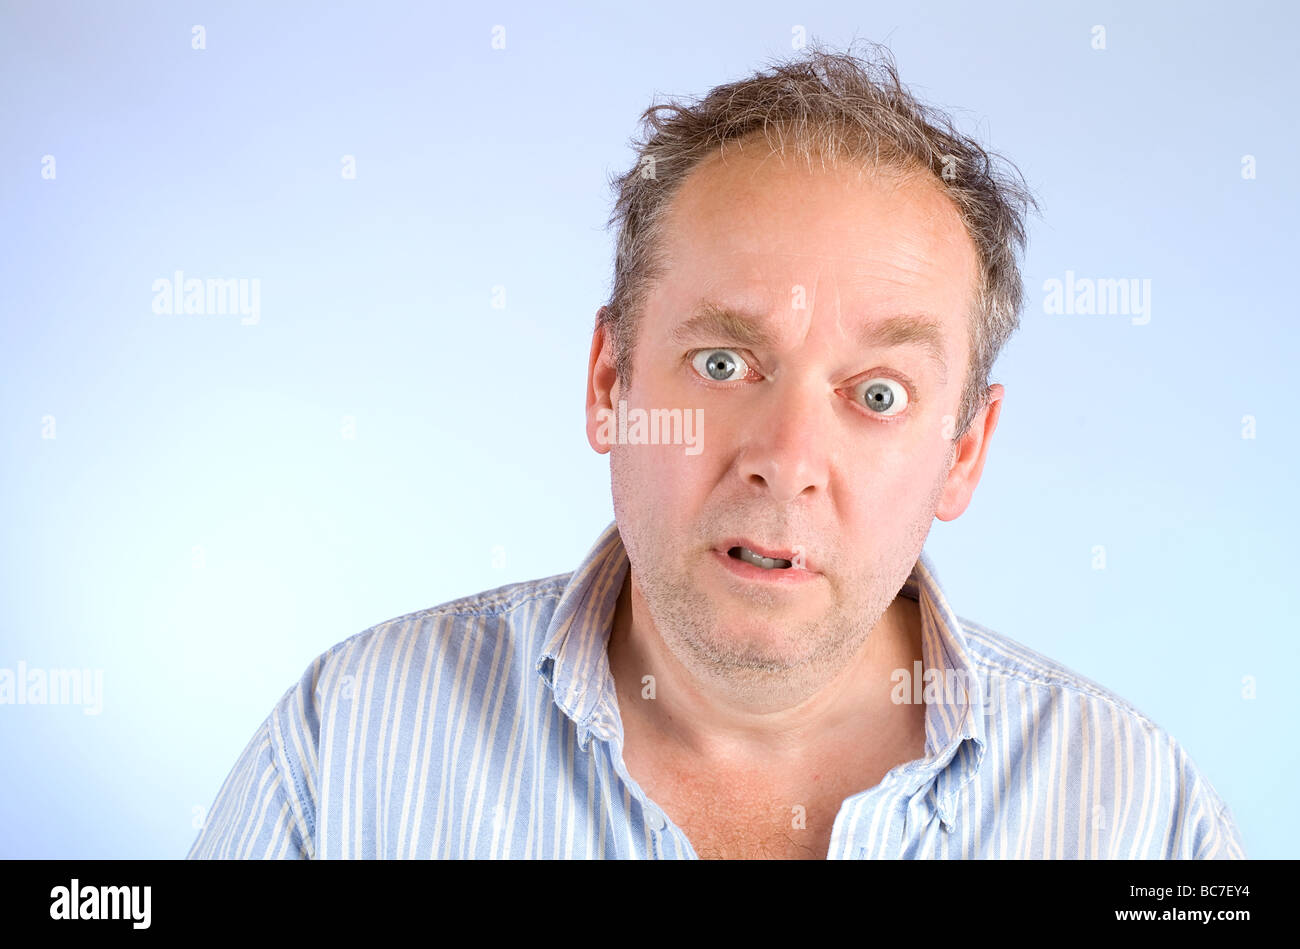 Serious and scruffy looking man posing and looking at the camera Stock Photo